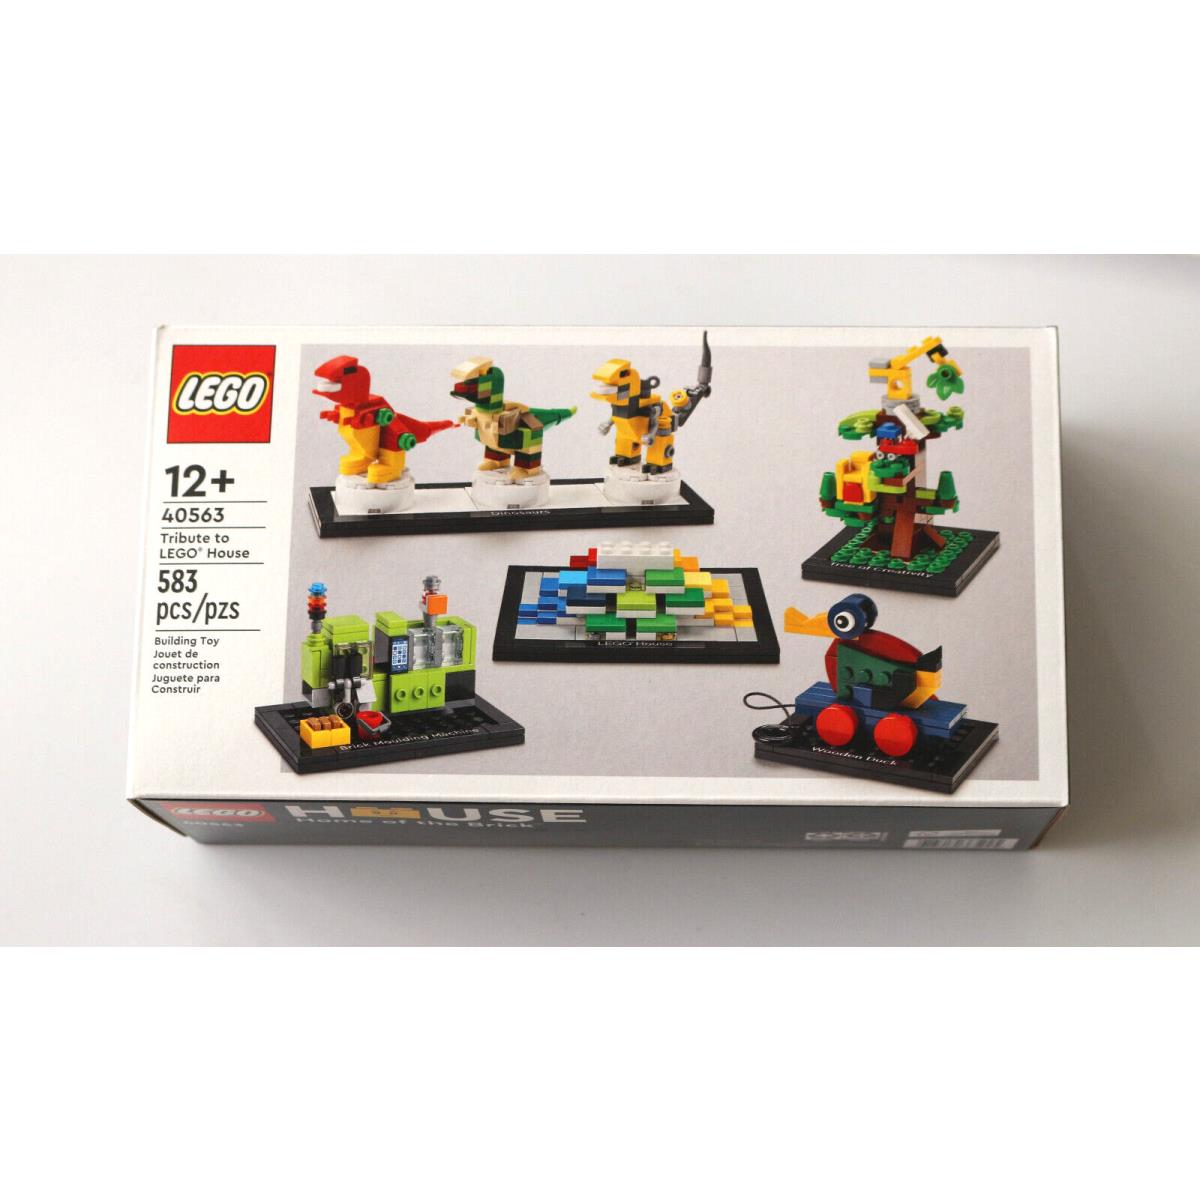 Lego Tribute to Lego House 40563 Exclusive Set